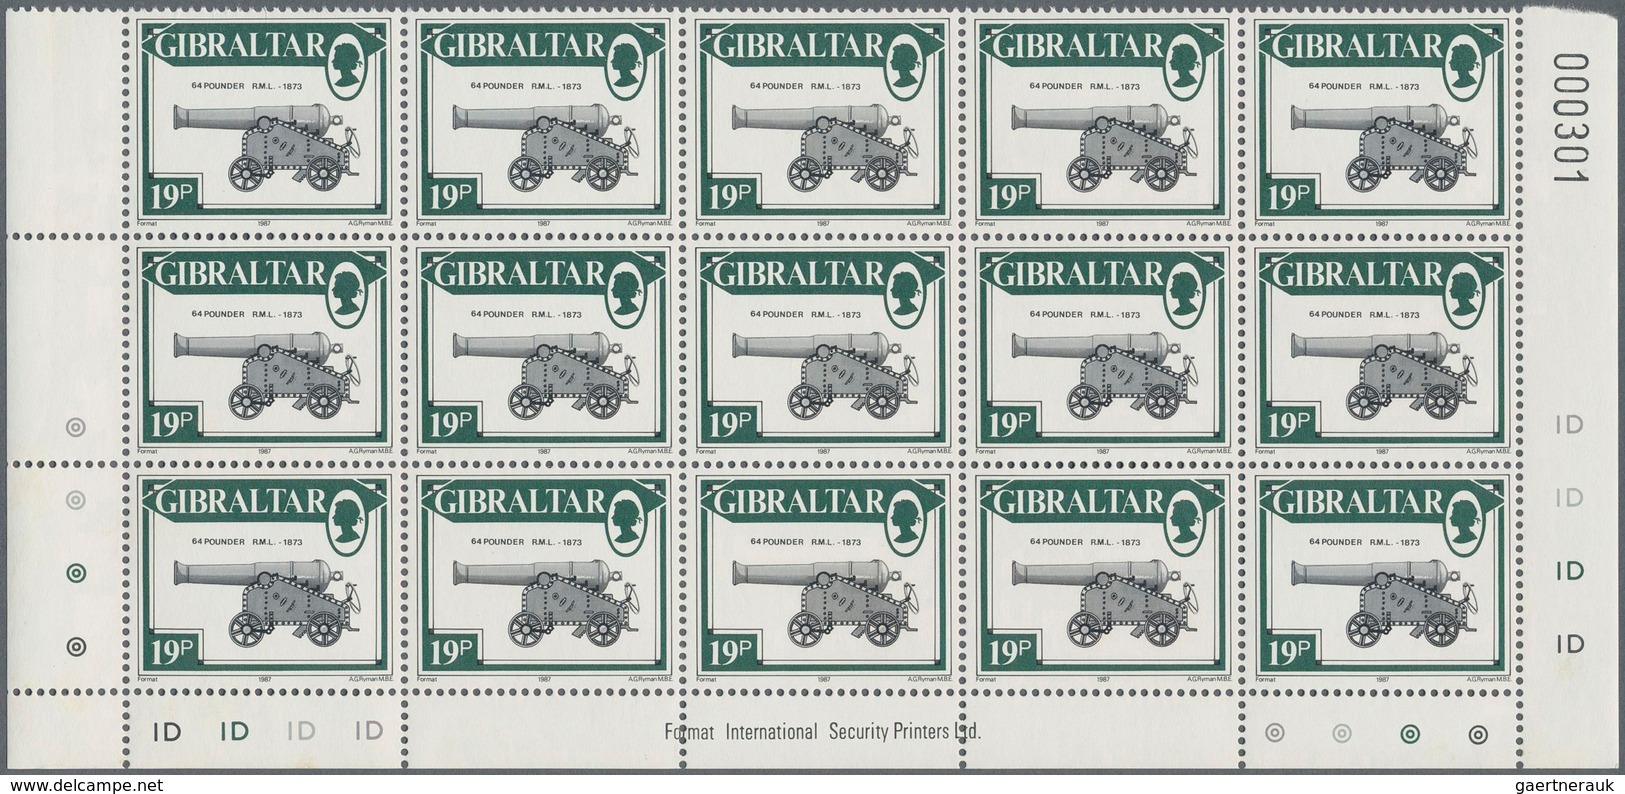 Gibraltar: 1987. Lot of 1,000 complete definitives set CANNONS (13 values). Mint, NH. (Michel 32,000